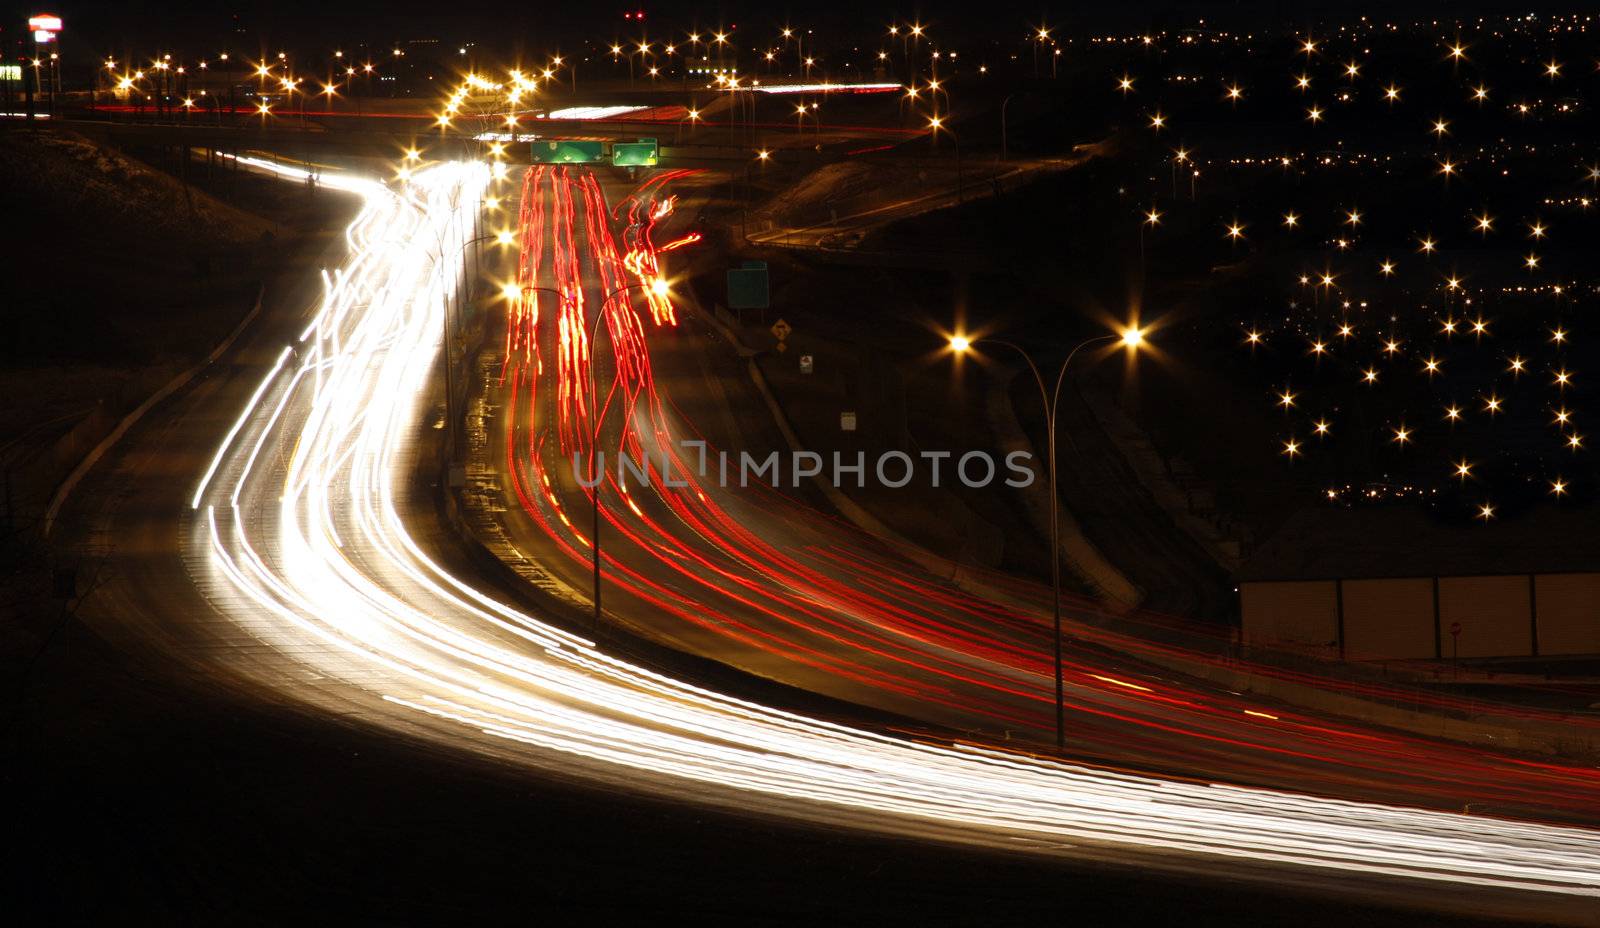 Hwy. by night
Low Light Photography  (LLP)